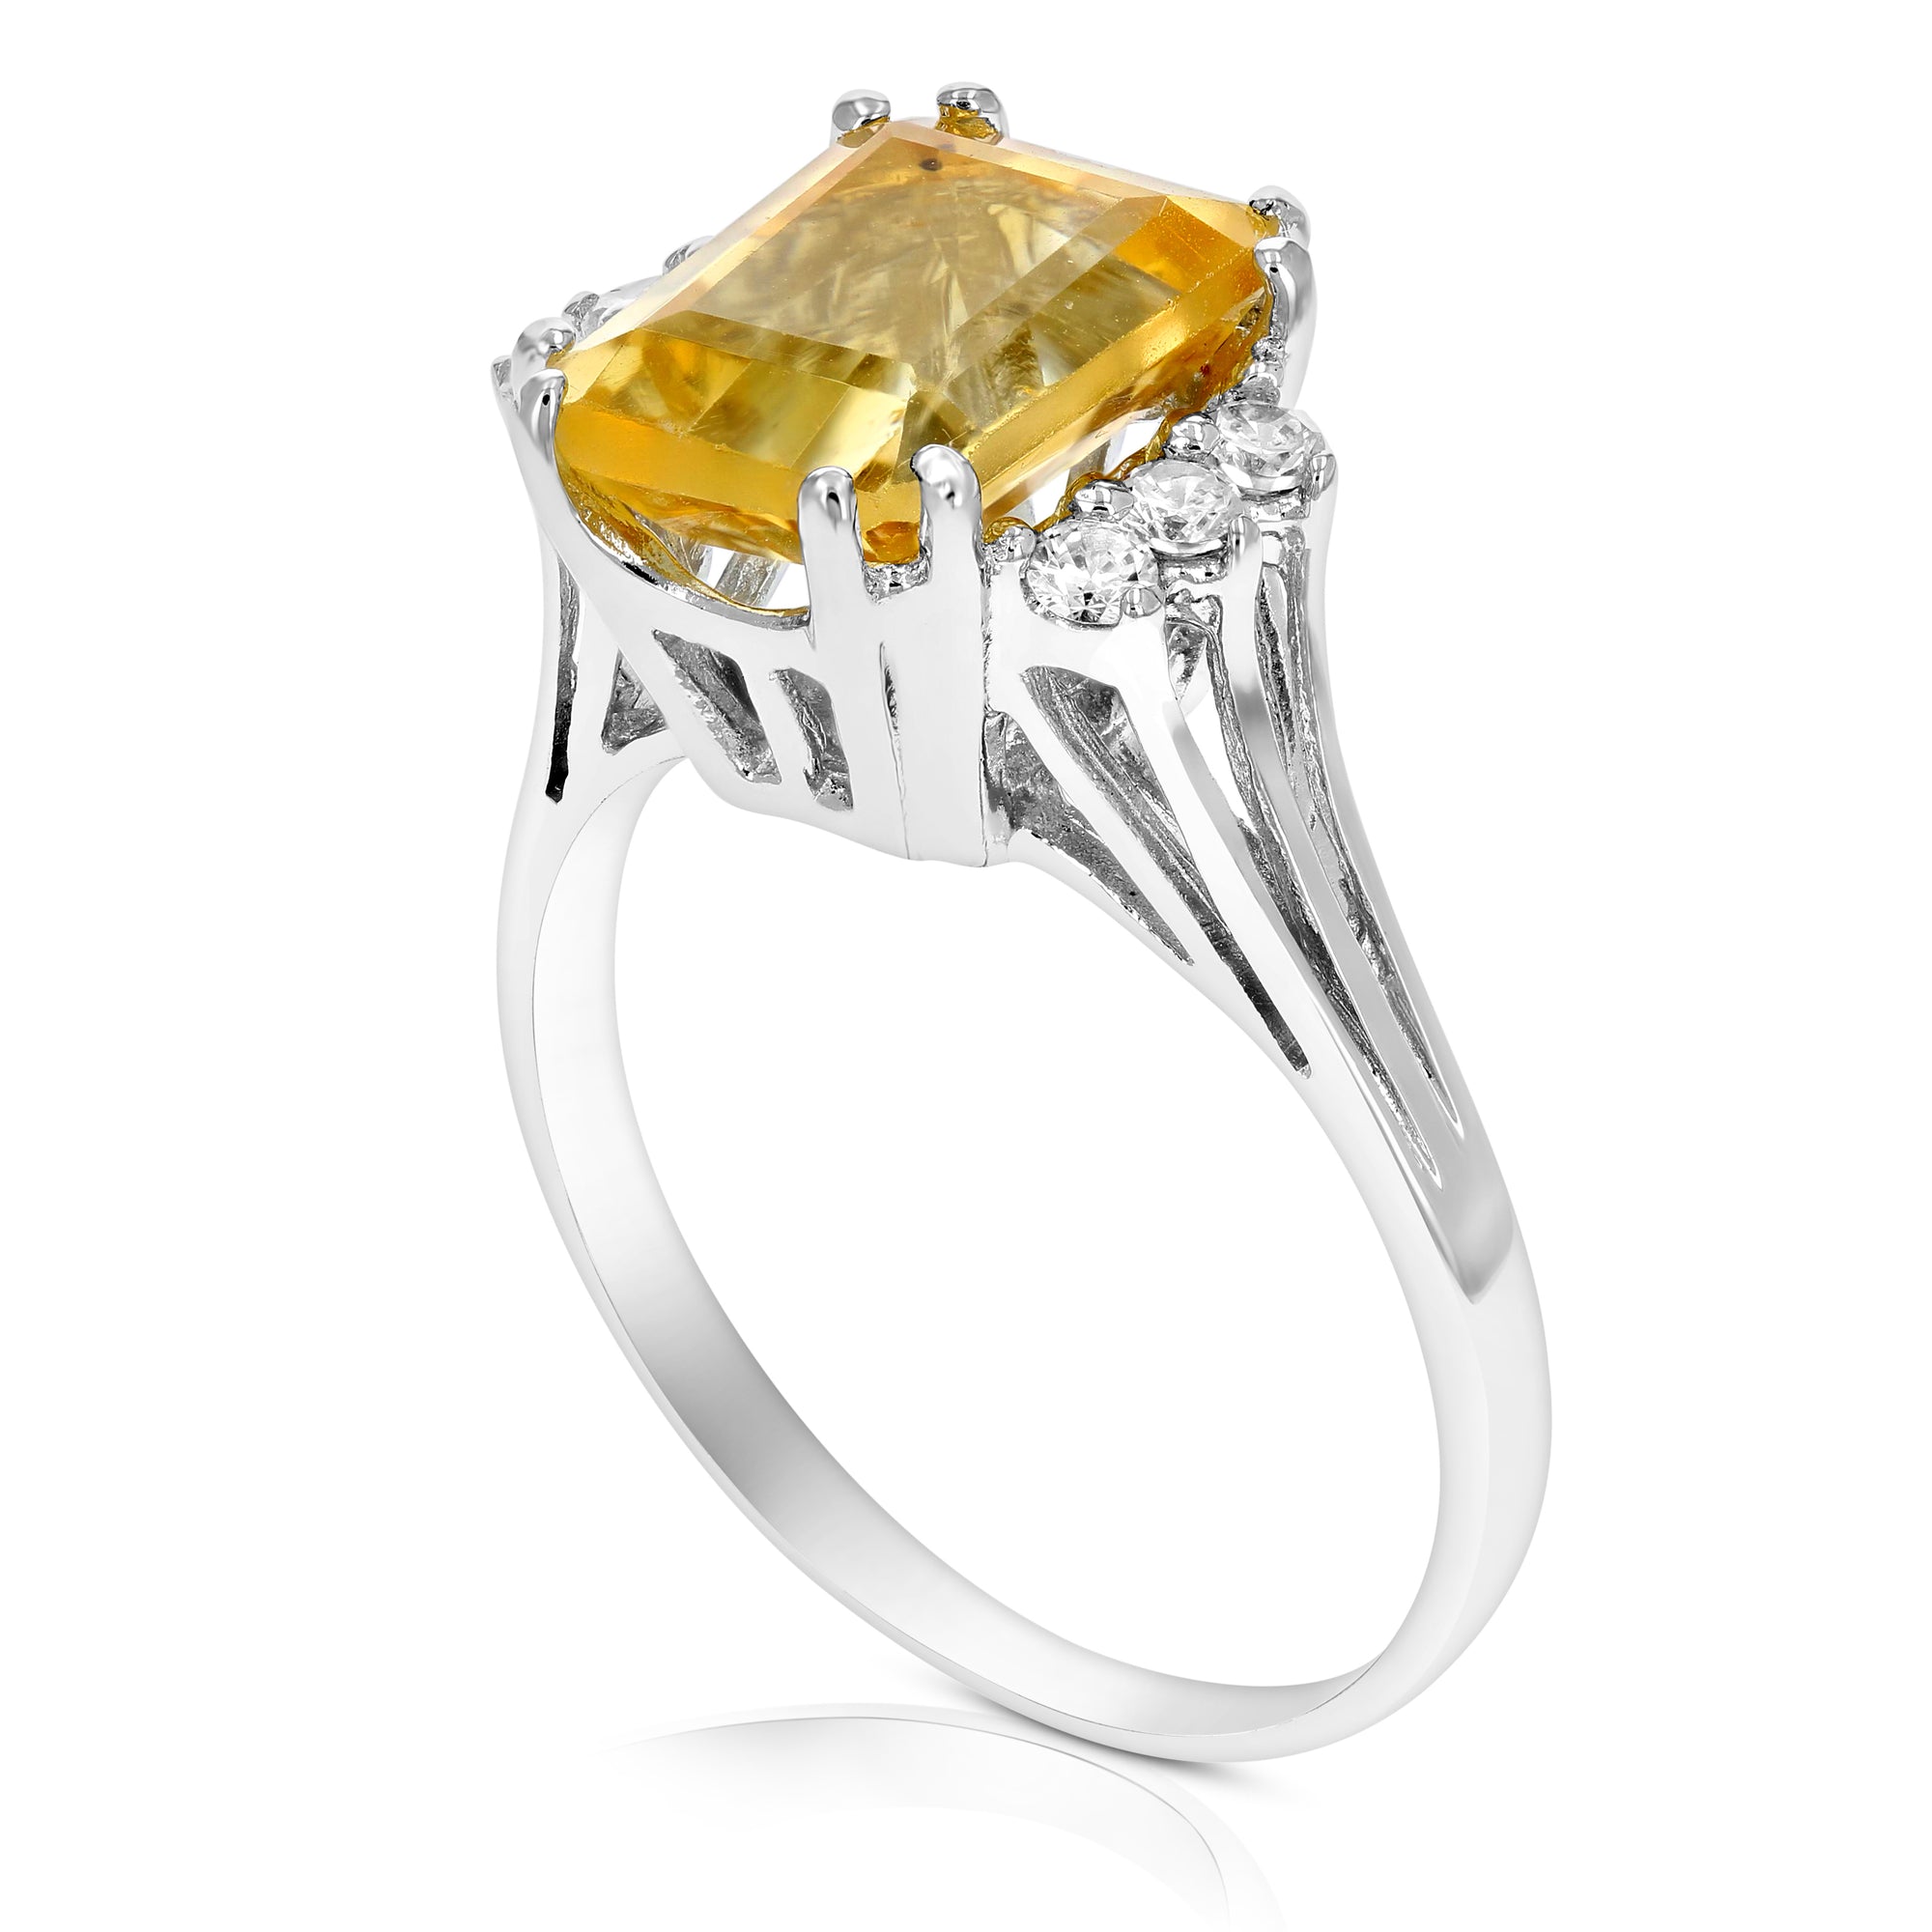 2.80 cttw Citrine Ring .925 Sterling Silver with Rhodium Emerald Shape 10x8 MM